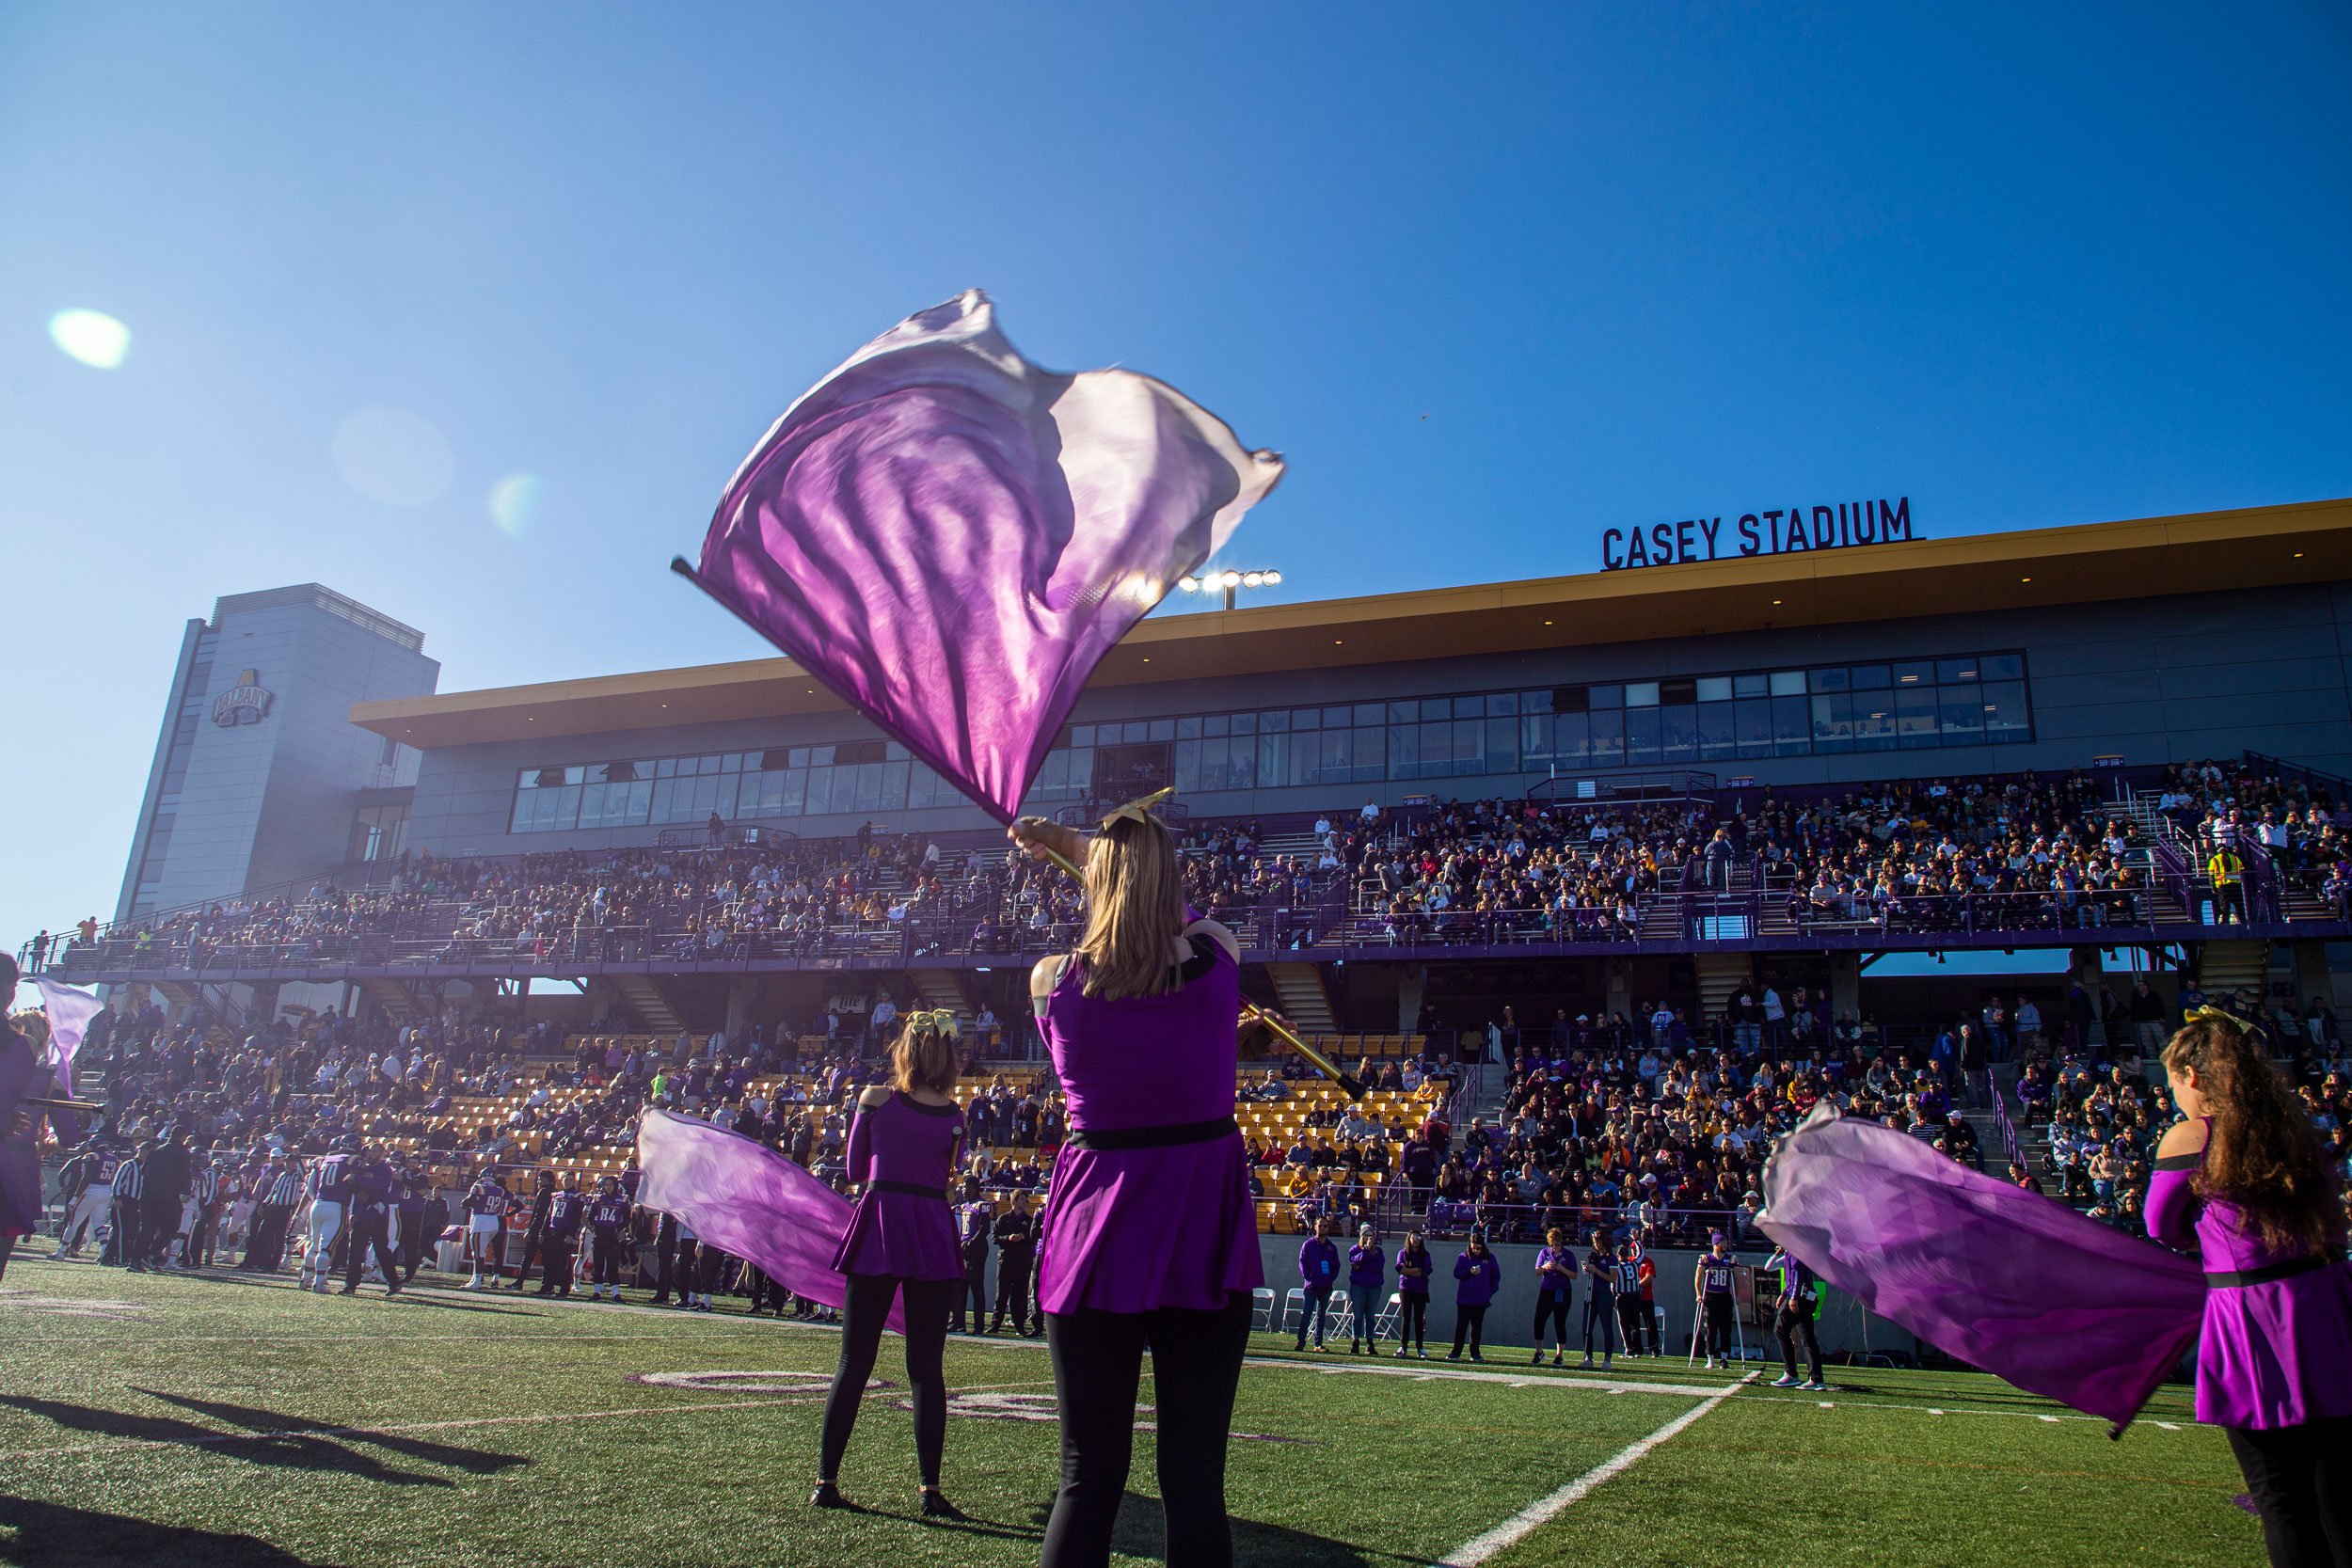 Color guard members wearing purple and black spin purple flags on the field before the packed stands at Casey Stadium on a sunny day.